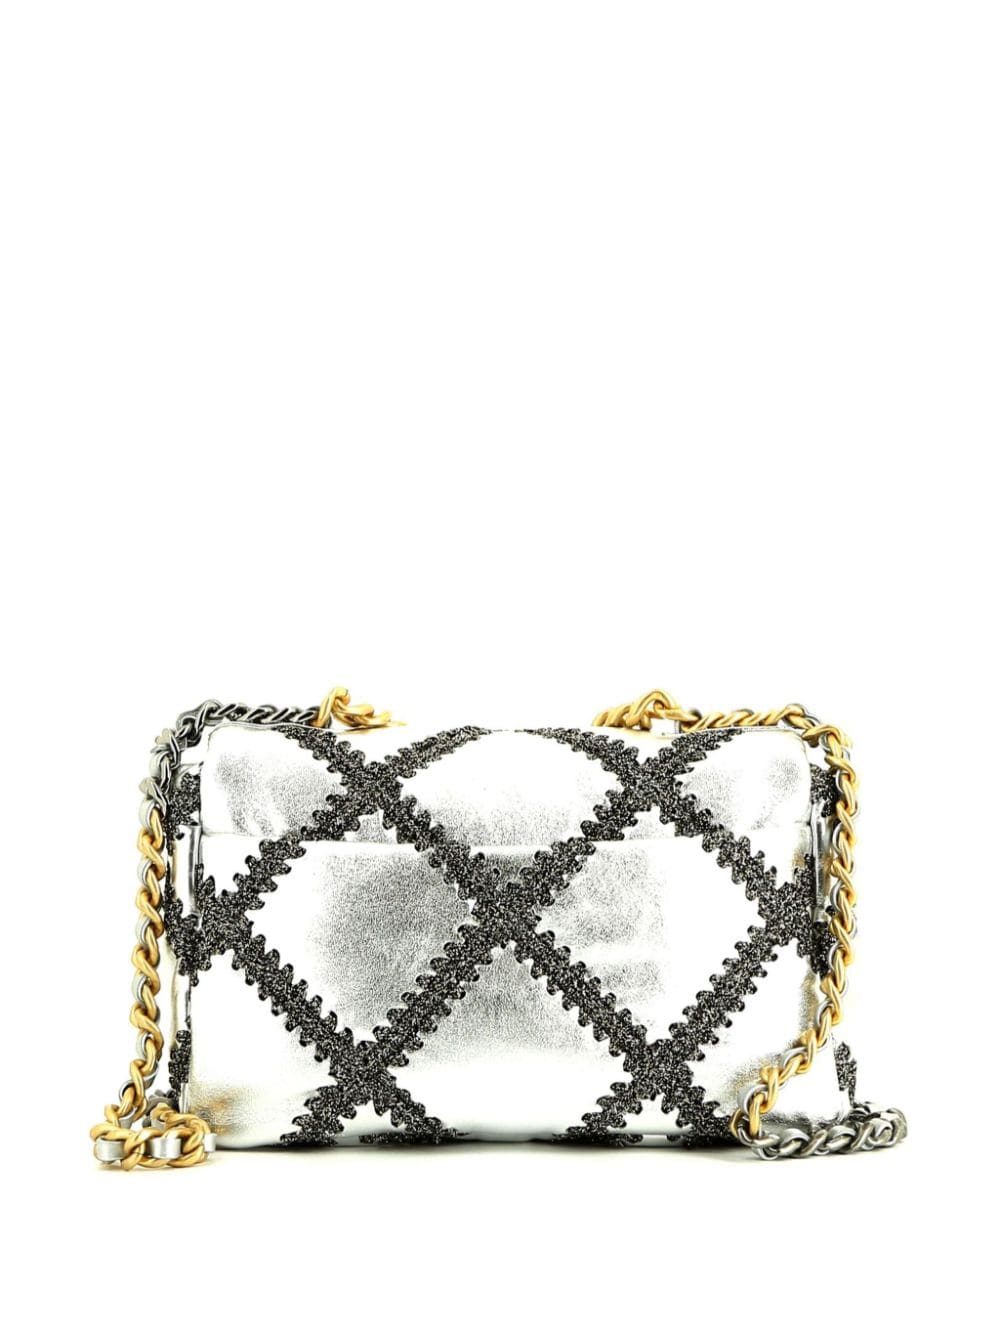 CHANEL Pre-Owned Chanel 19 crochet-knit two-way bag - Zilver